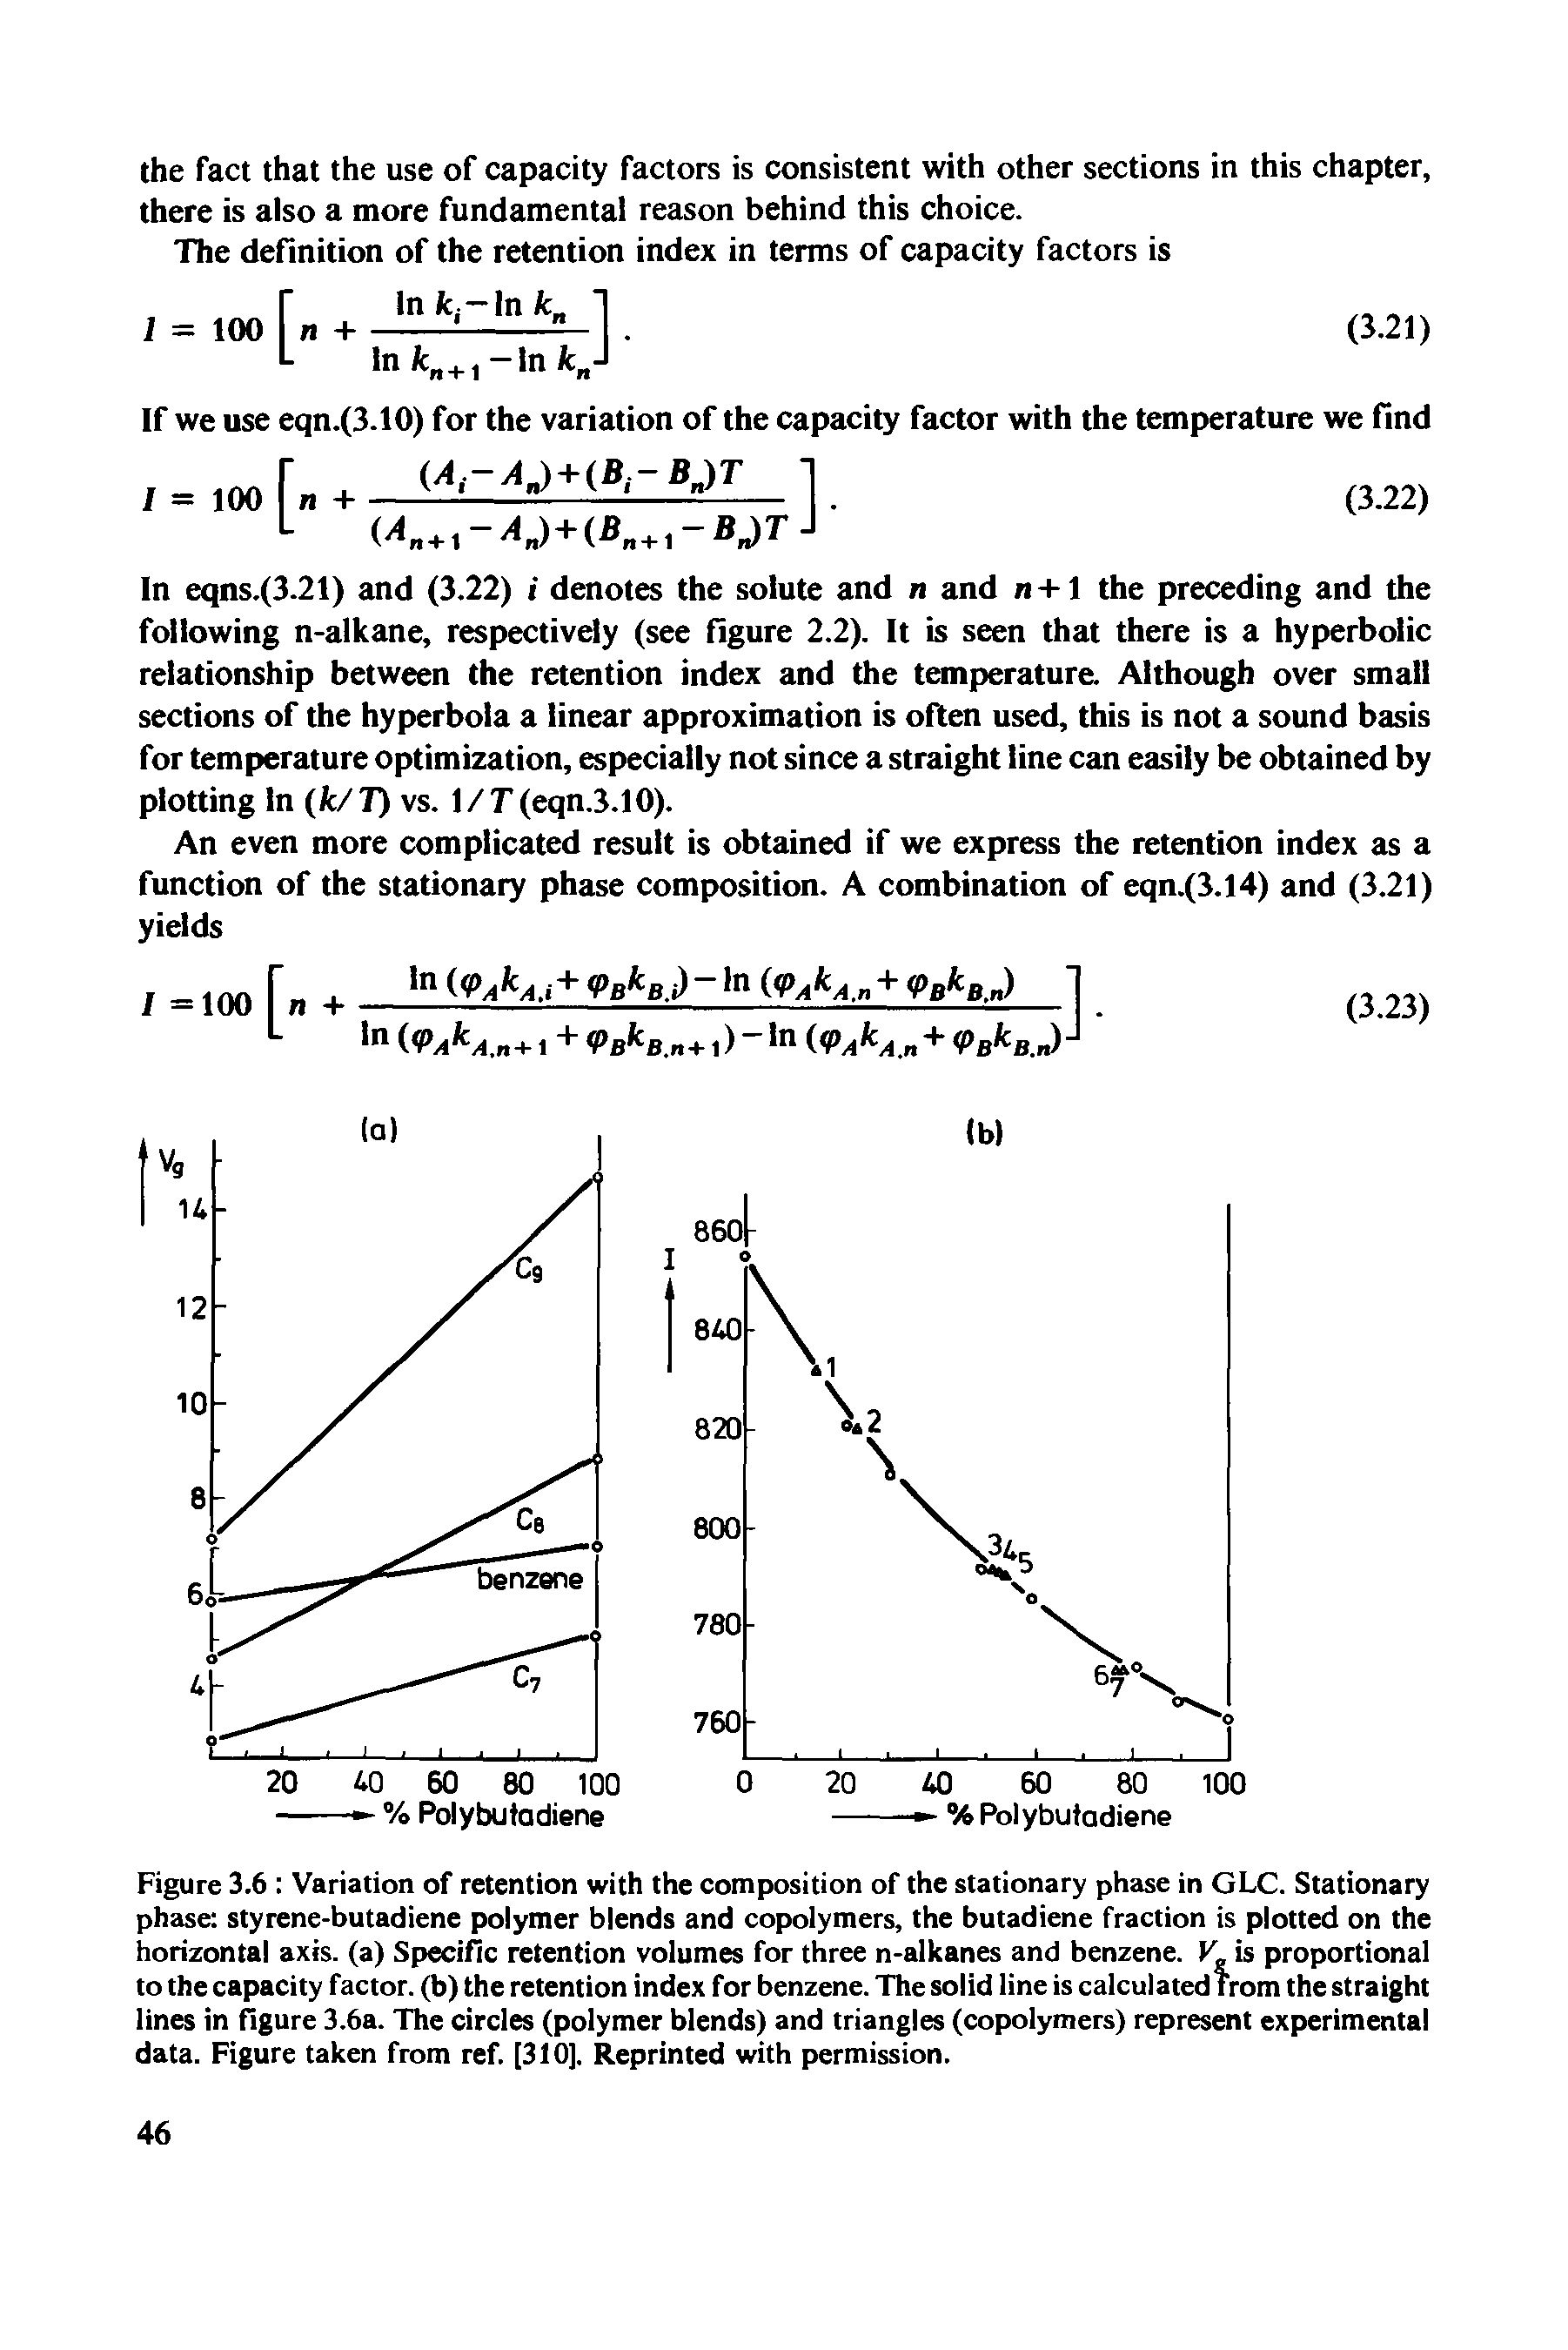 Figure 3.6 Variation of retention with the composition of the stationary phase in GLC. Stationary phase styrene-butadiene polymer blends and copolymers, the butadiene fraction is plotted on the horizontal axis, (a) Specific retention volumes for three n-alkanes and benzene. V is proportional to the capacity factor, (b) the retention index for benzene. The solid line is calculated from the straight lines in figure 3.6a. The circles (polymer blends) and triangles (copolymers) represent experimental data. Figure taken from ref. [310], Reprinted with permission.